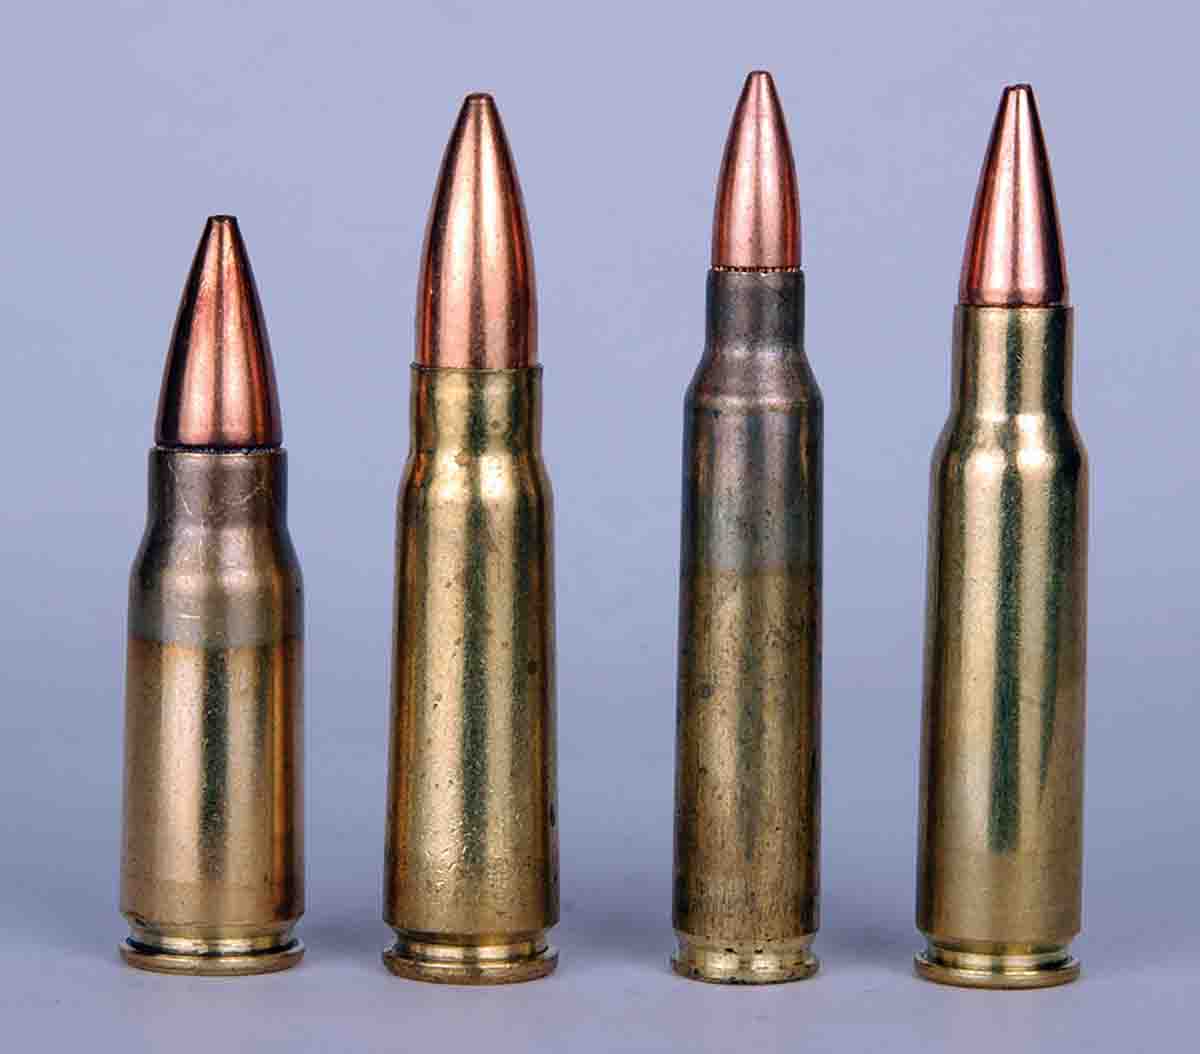 Left to right: The 7.92/8mm Kurz, 7.62x39mm (Russian), 5.56mm NATO (American) and the Remington 6.8 SPC sporting round.